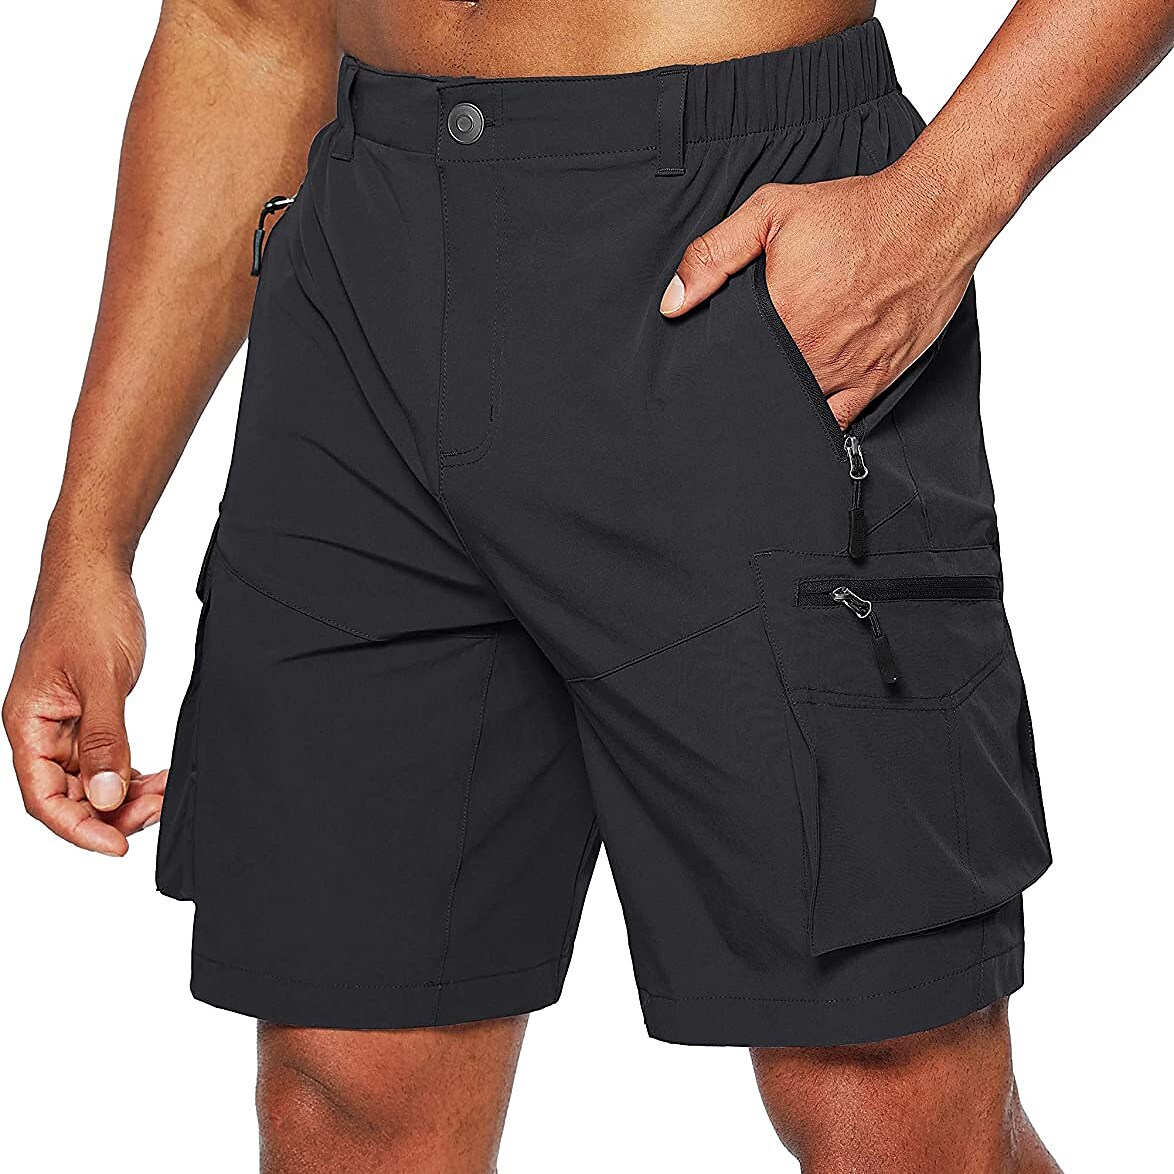 Men's Military Outdoor Ripstop Breathable Quick Dry Lightweight Hiking Shorts 